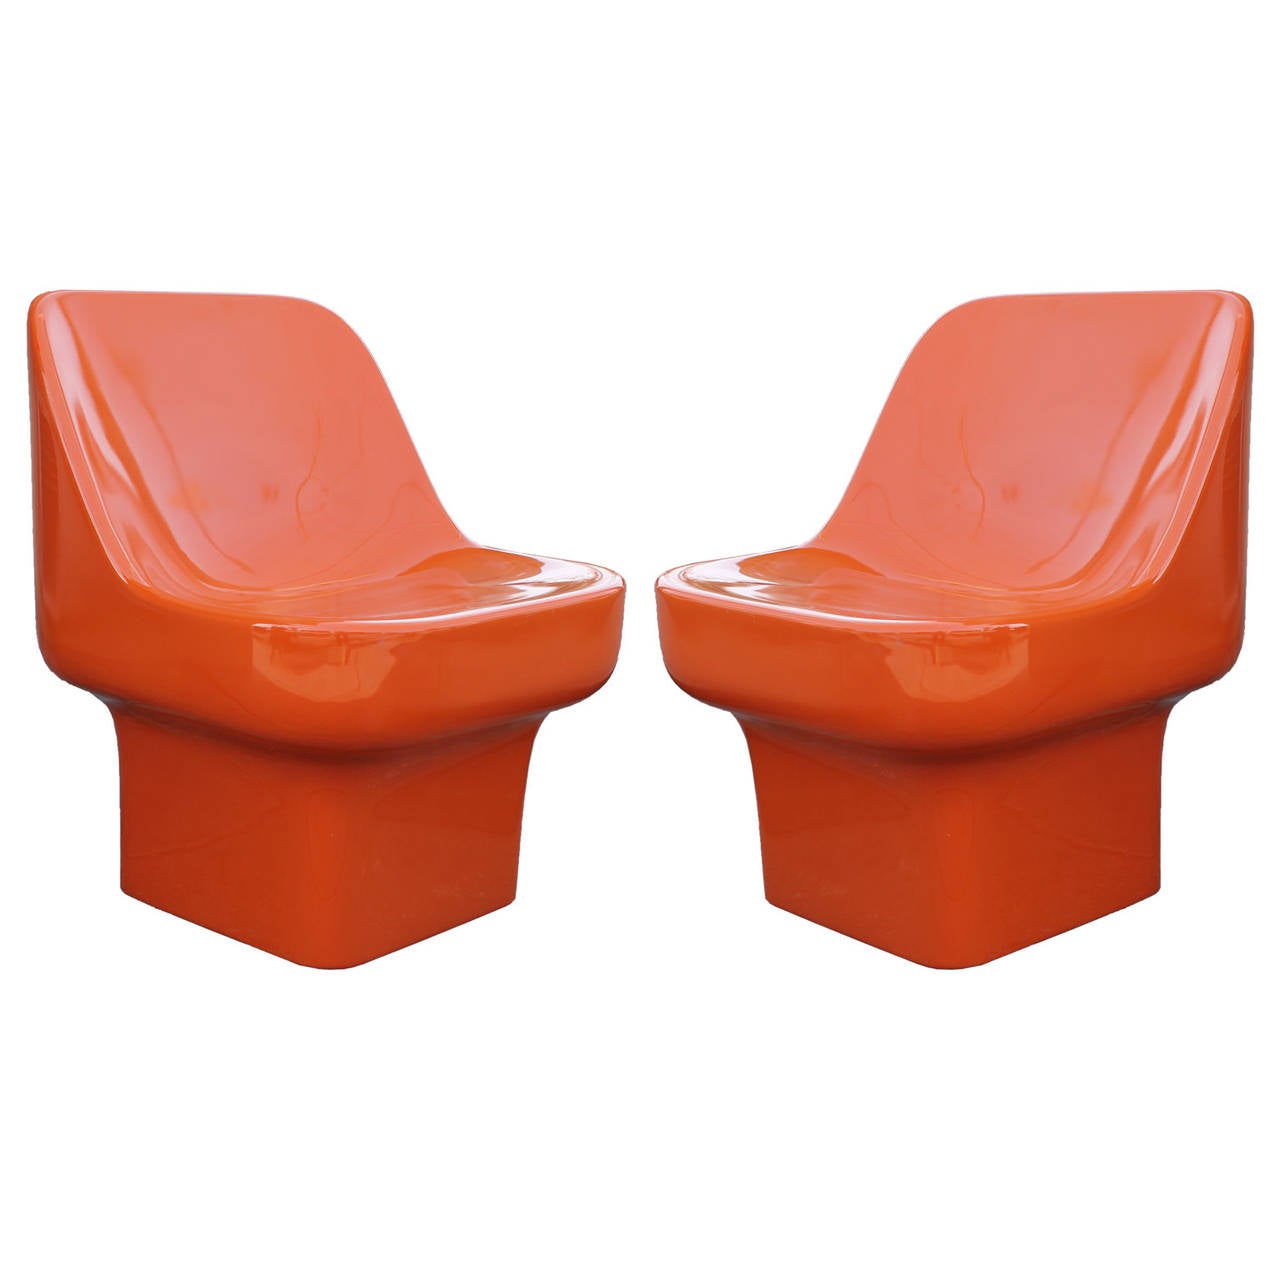 Sleek pair of lacquered fiberglass chairs in a Gloss orange by Douglas Deeds for  Architectural Fiberglass.  Restored in excellent condition.